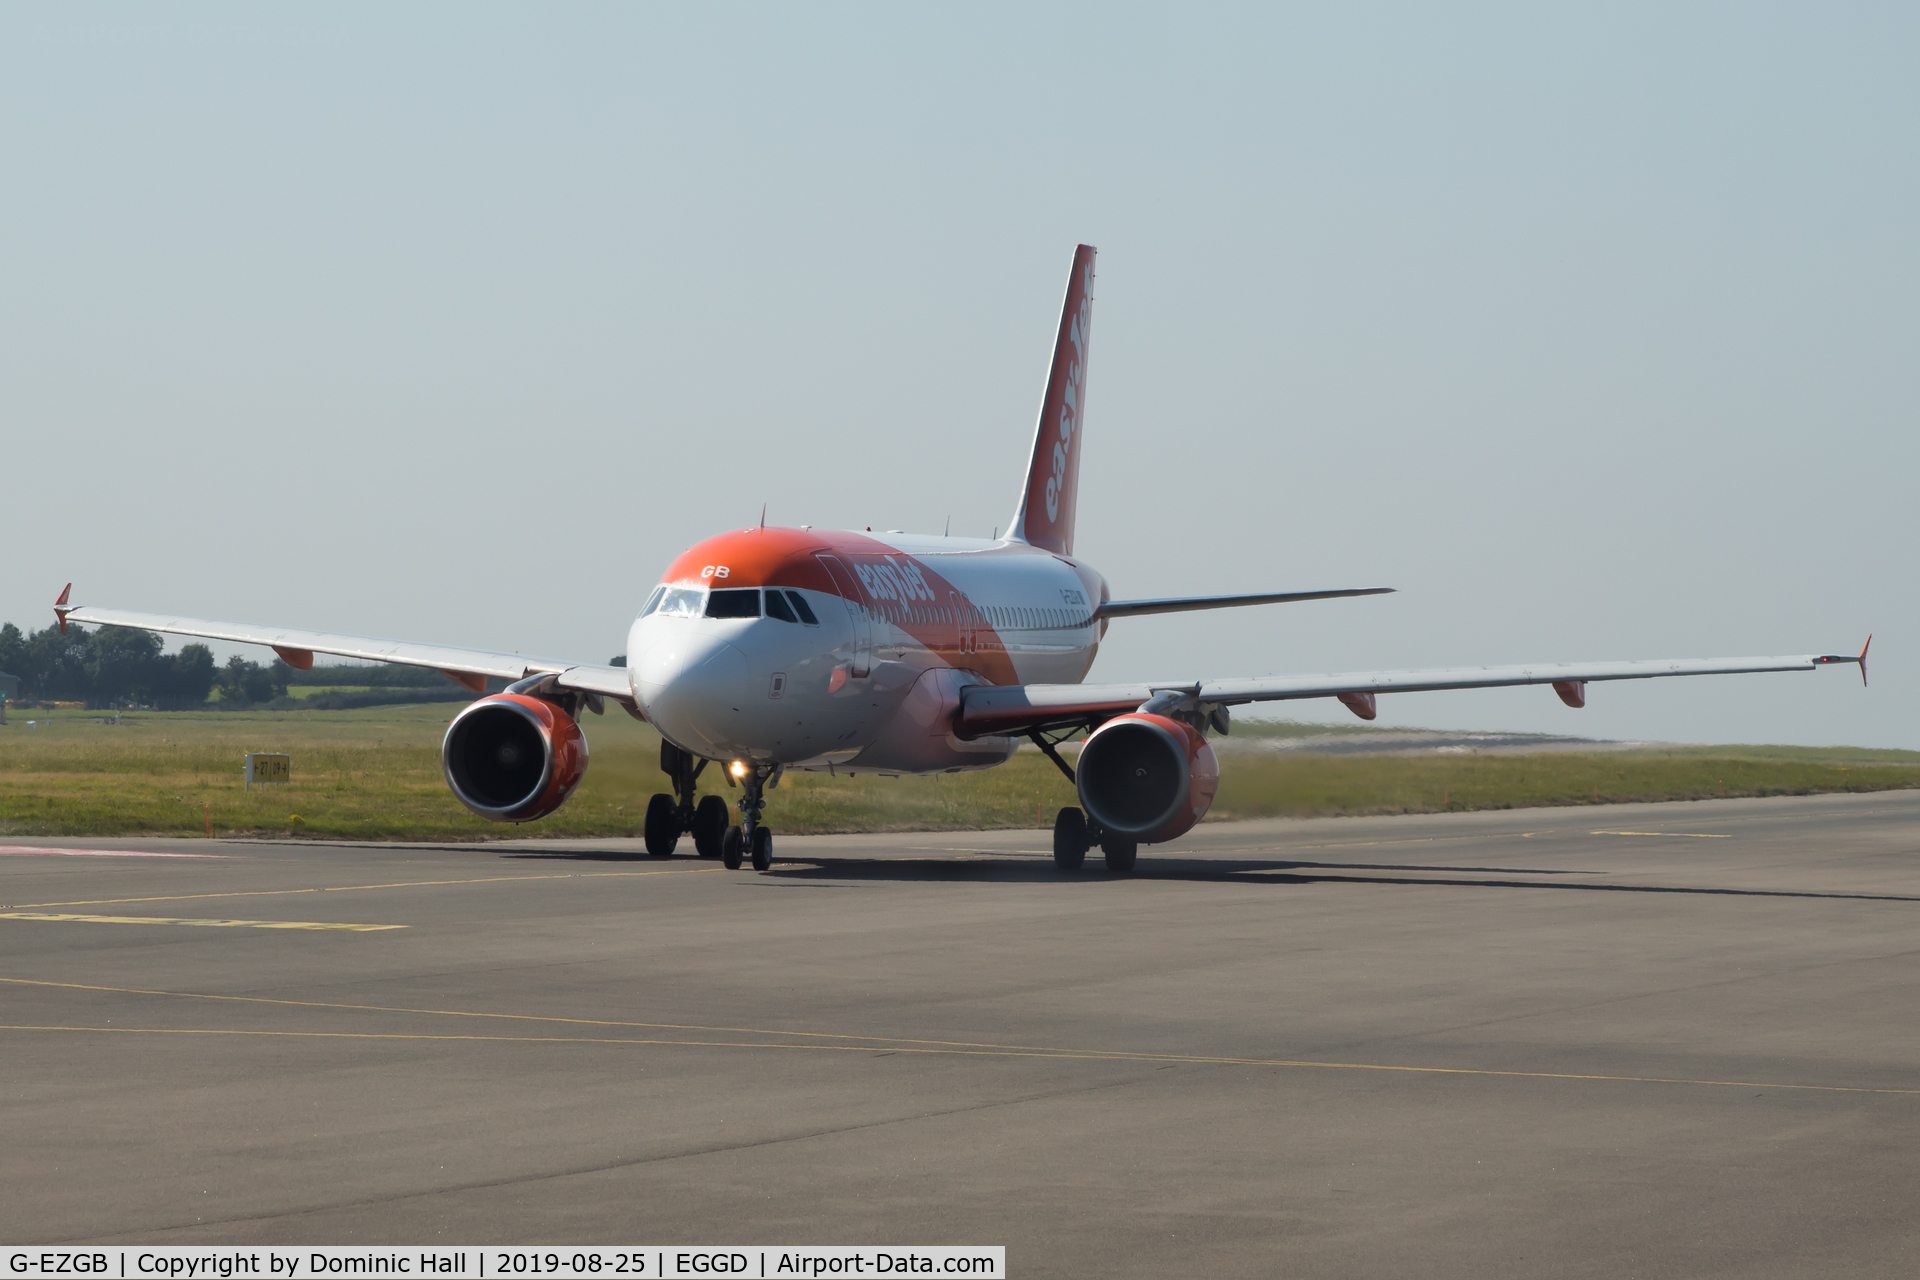 G-EZGB, 2010 Airbus A319-111 C/N 4437, Taxiing to RWY 27 for departure.